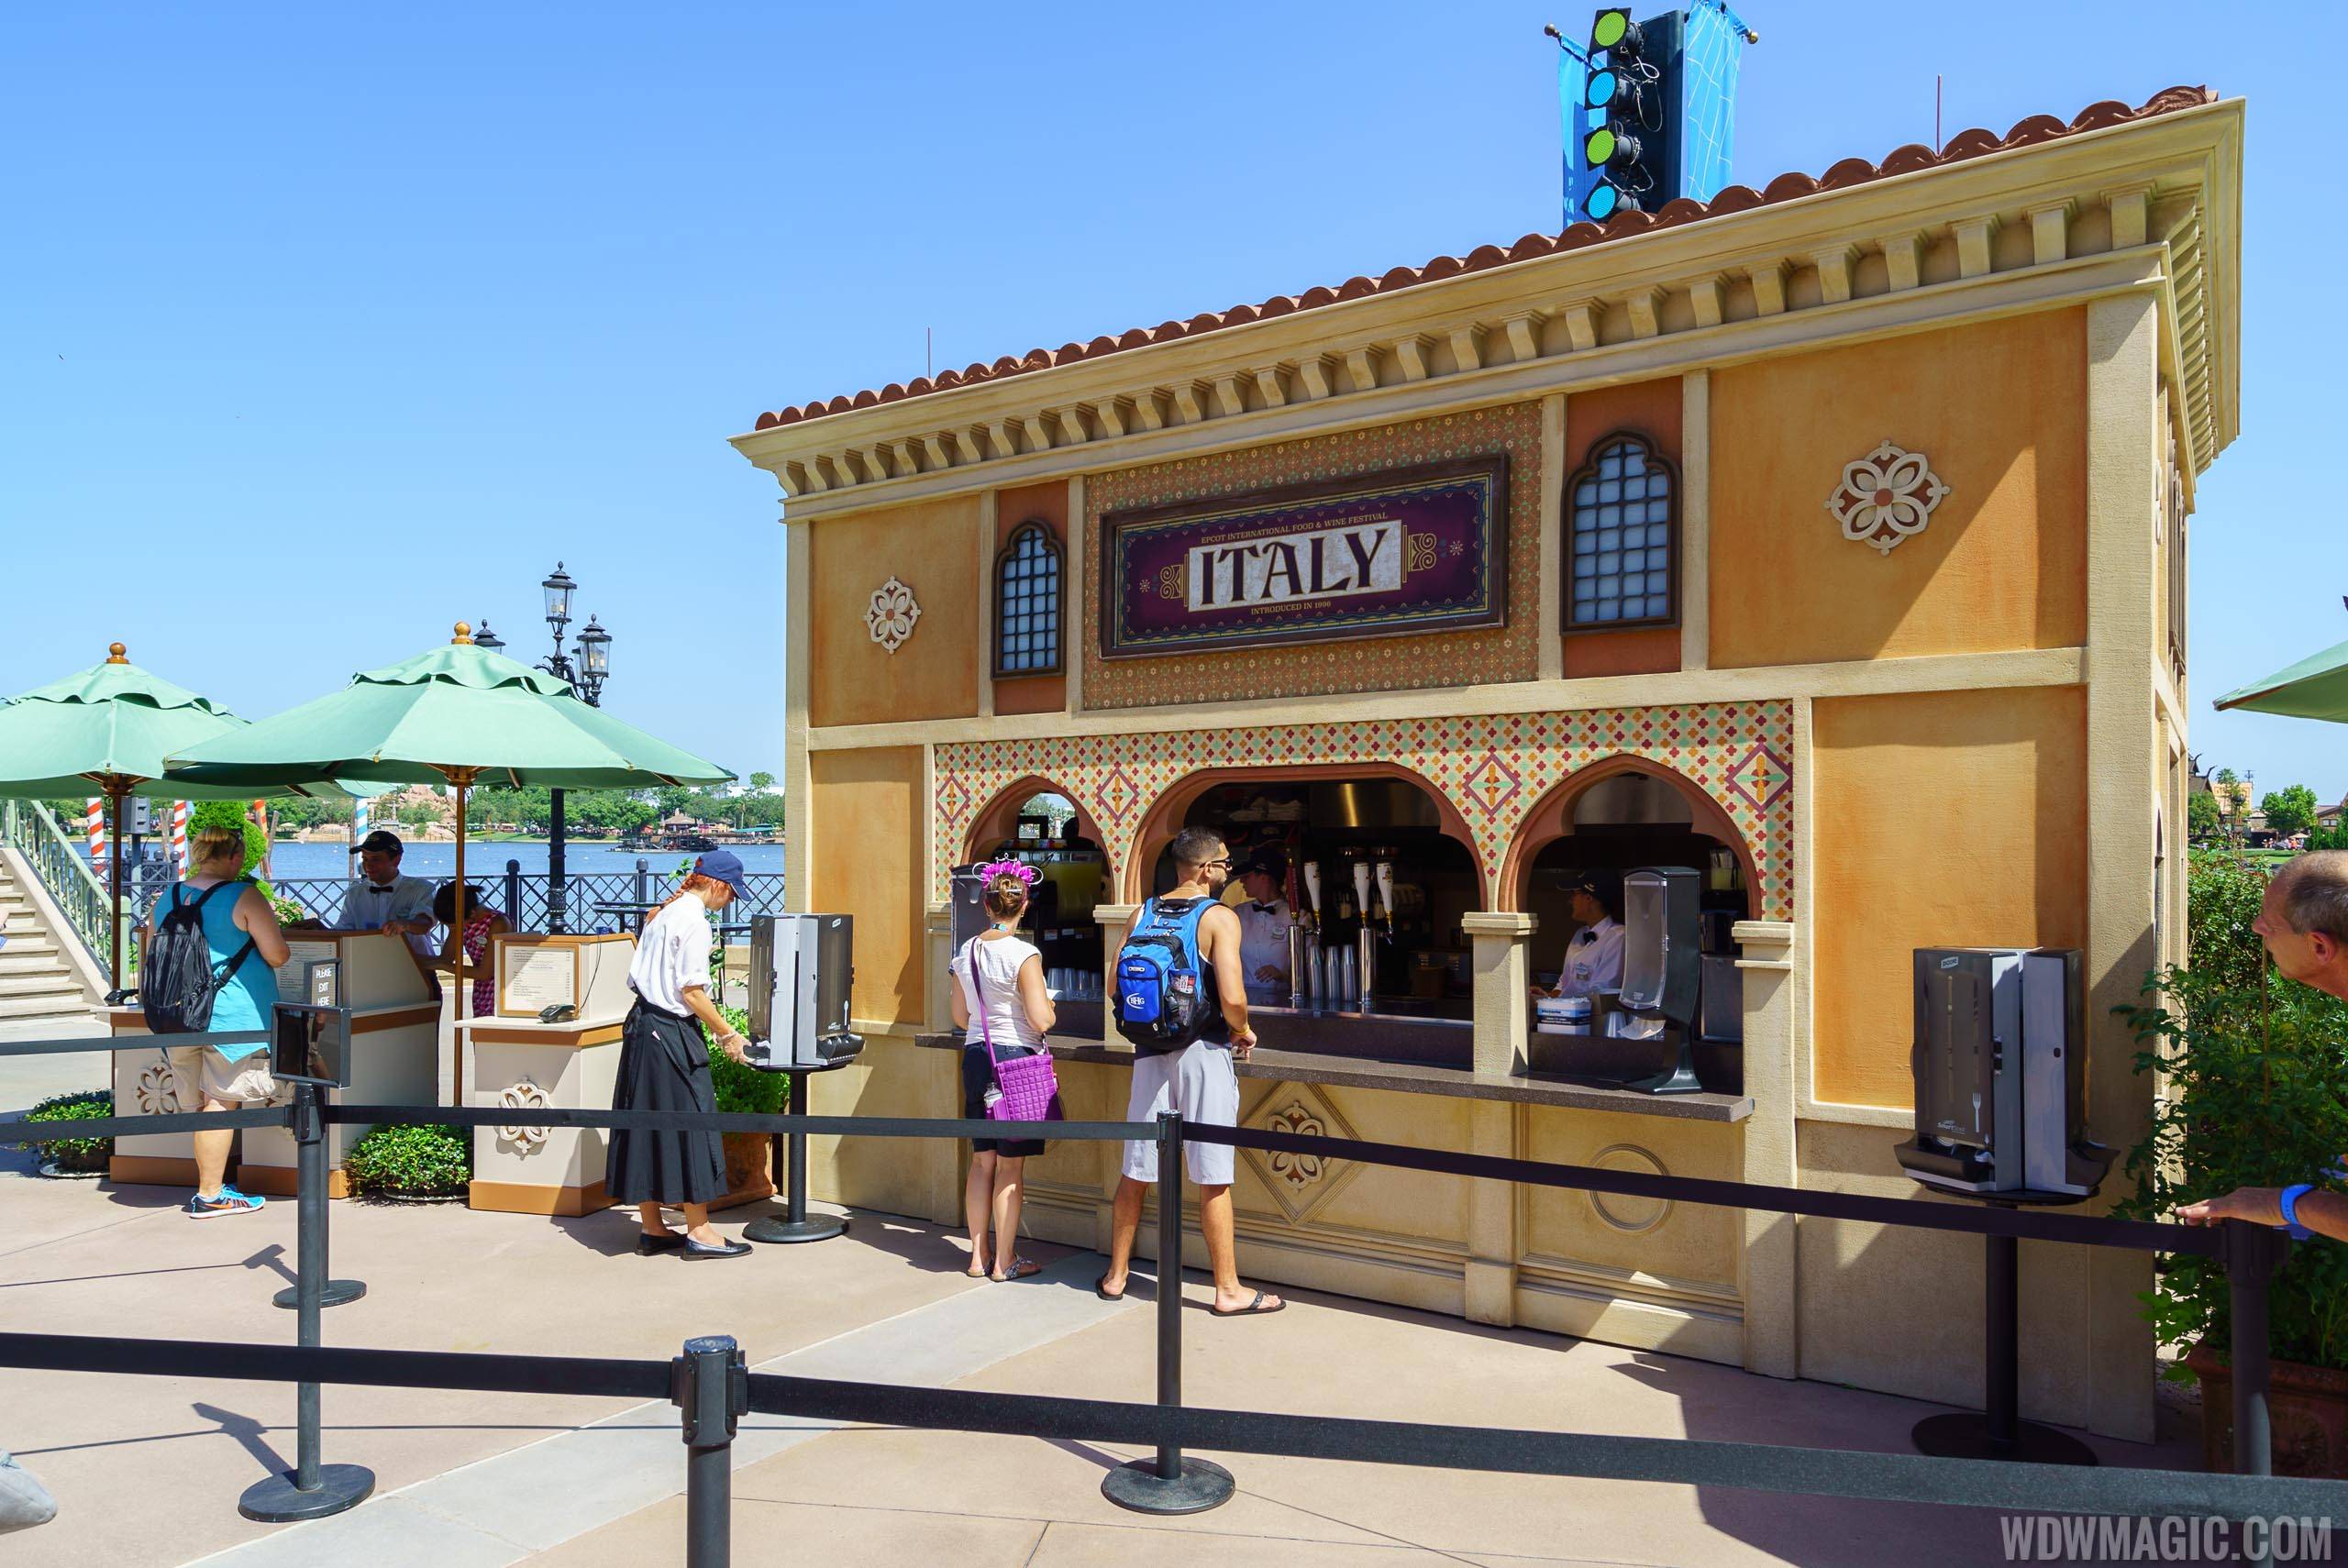 2017 Epcot Food and Wine Festival - Italy marketplace kiosk